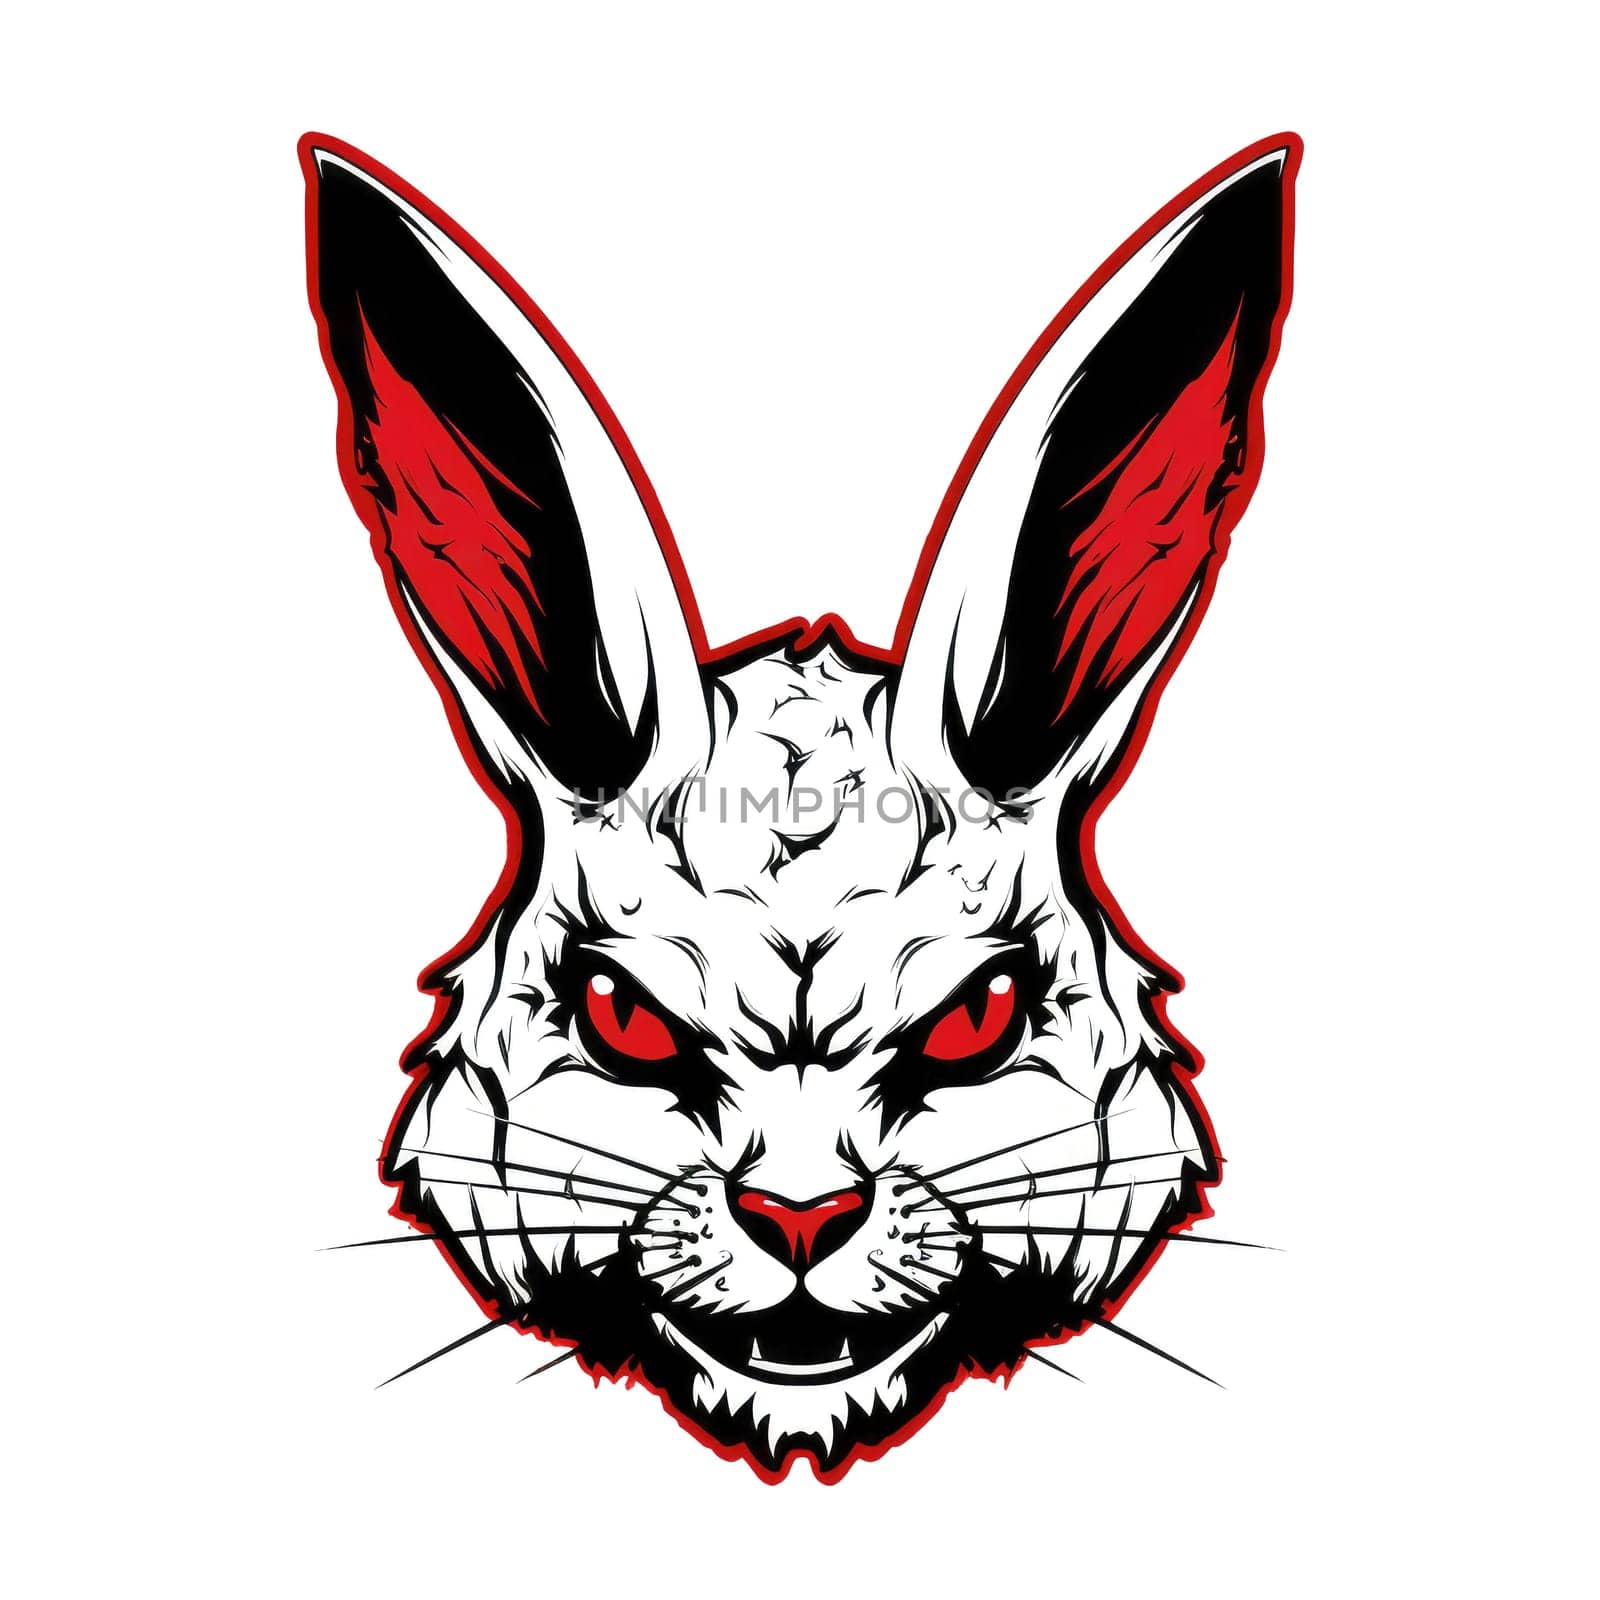 Evil rabbit. Portrait of a rabbit in the character of the devil in vector art style. Template for sticker, t-shirt print, poster, etc.